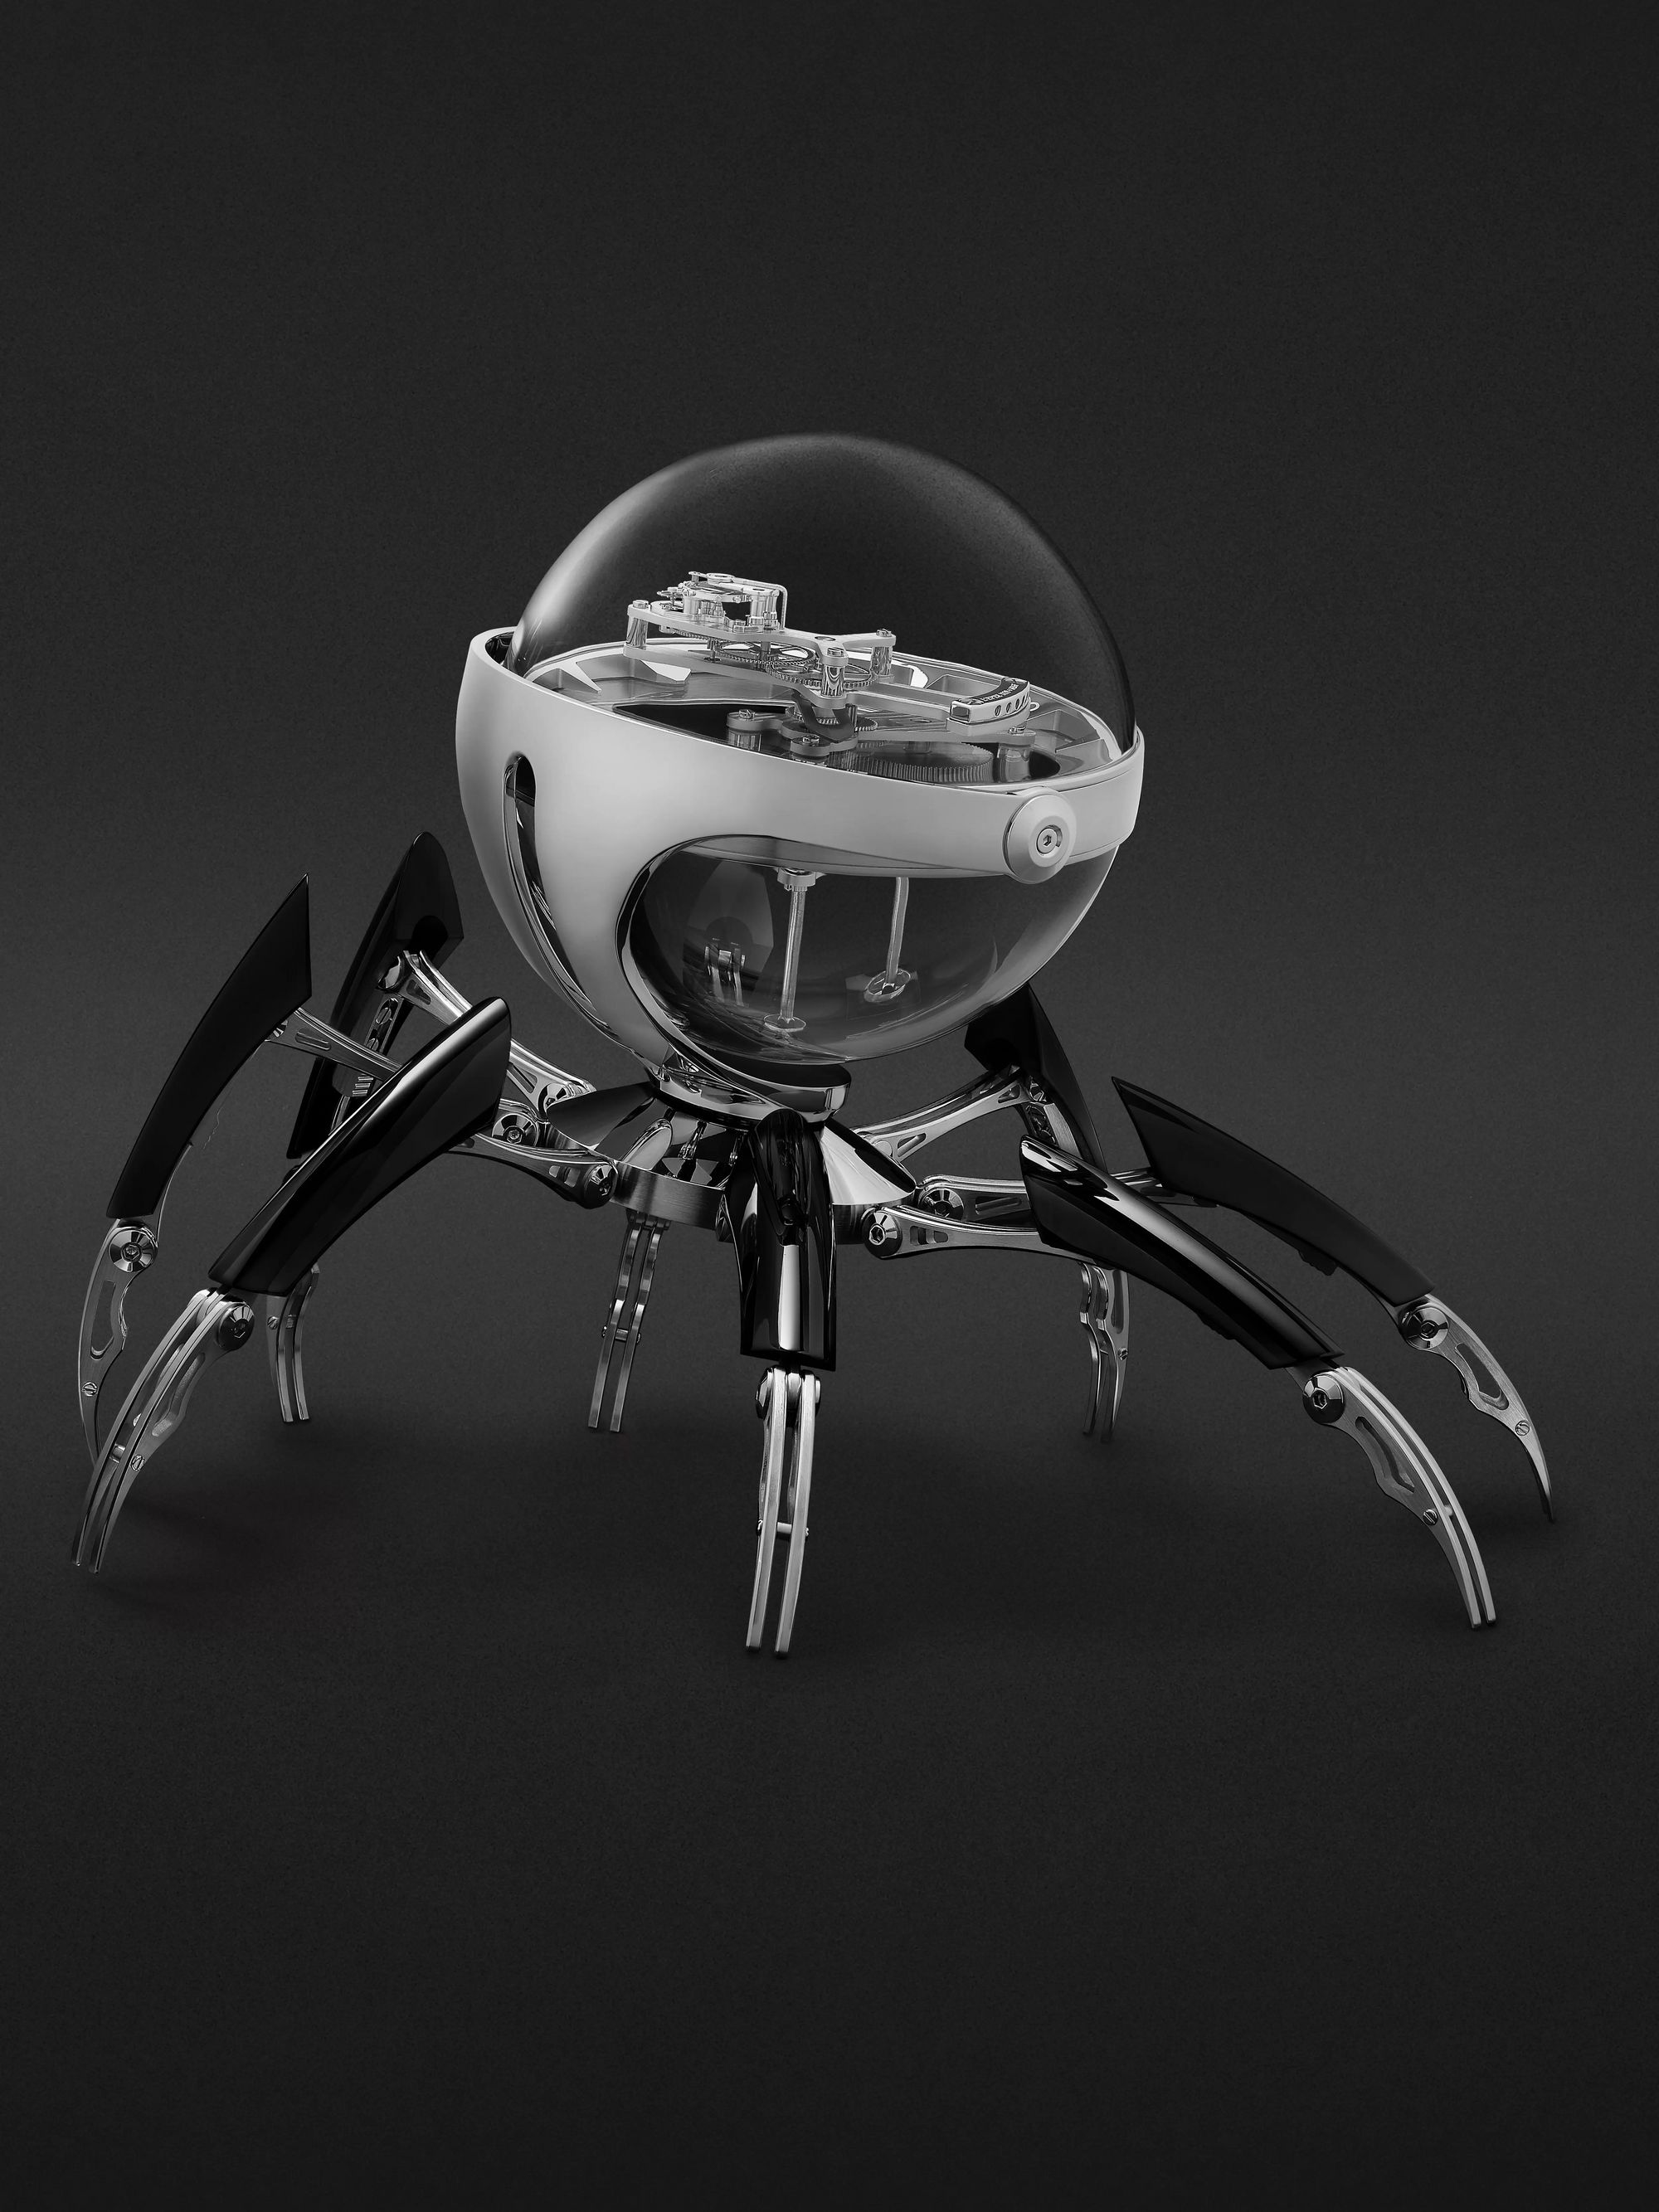 MB&F + L'Epée 1839 Octopod Hand-Wound Stainless Steel, Nickel and Palladium-Plated Table Clock, Ref. No. 11.6000/201